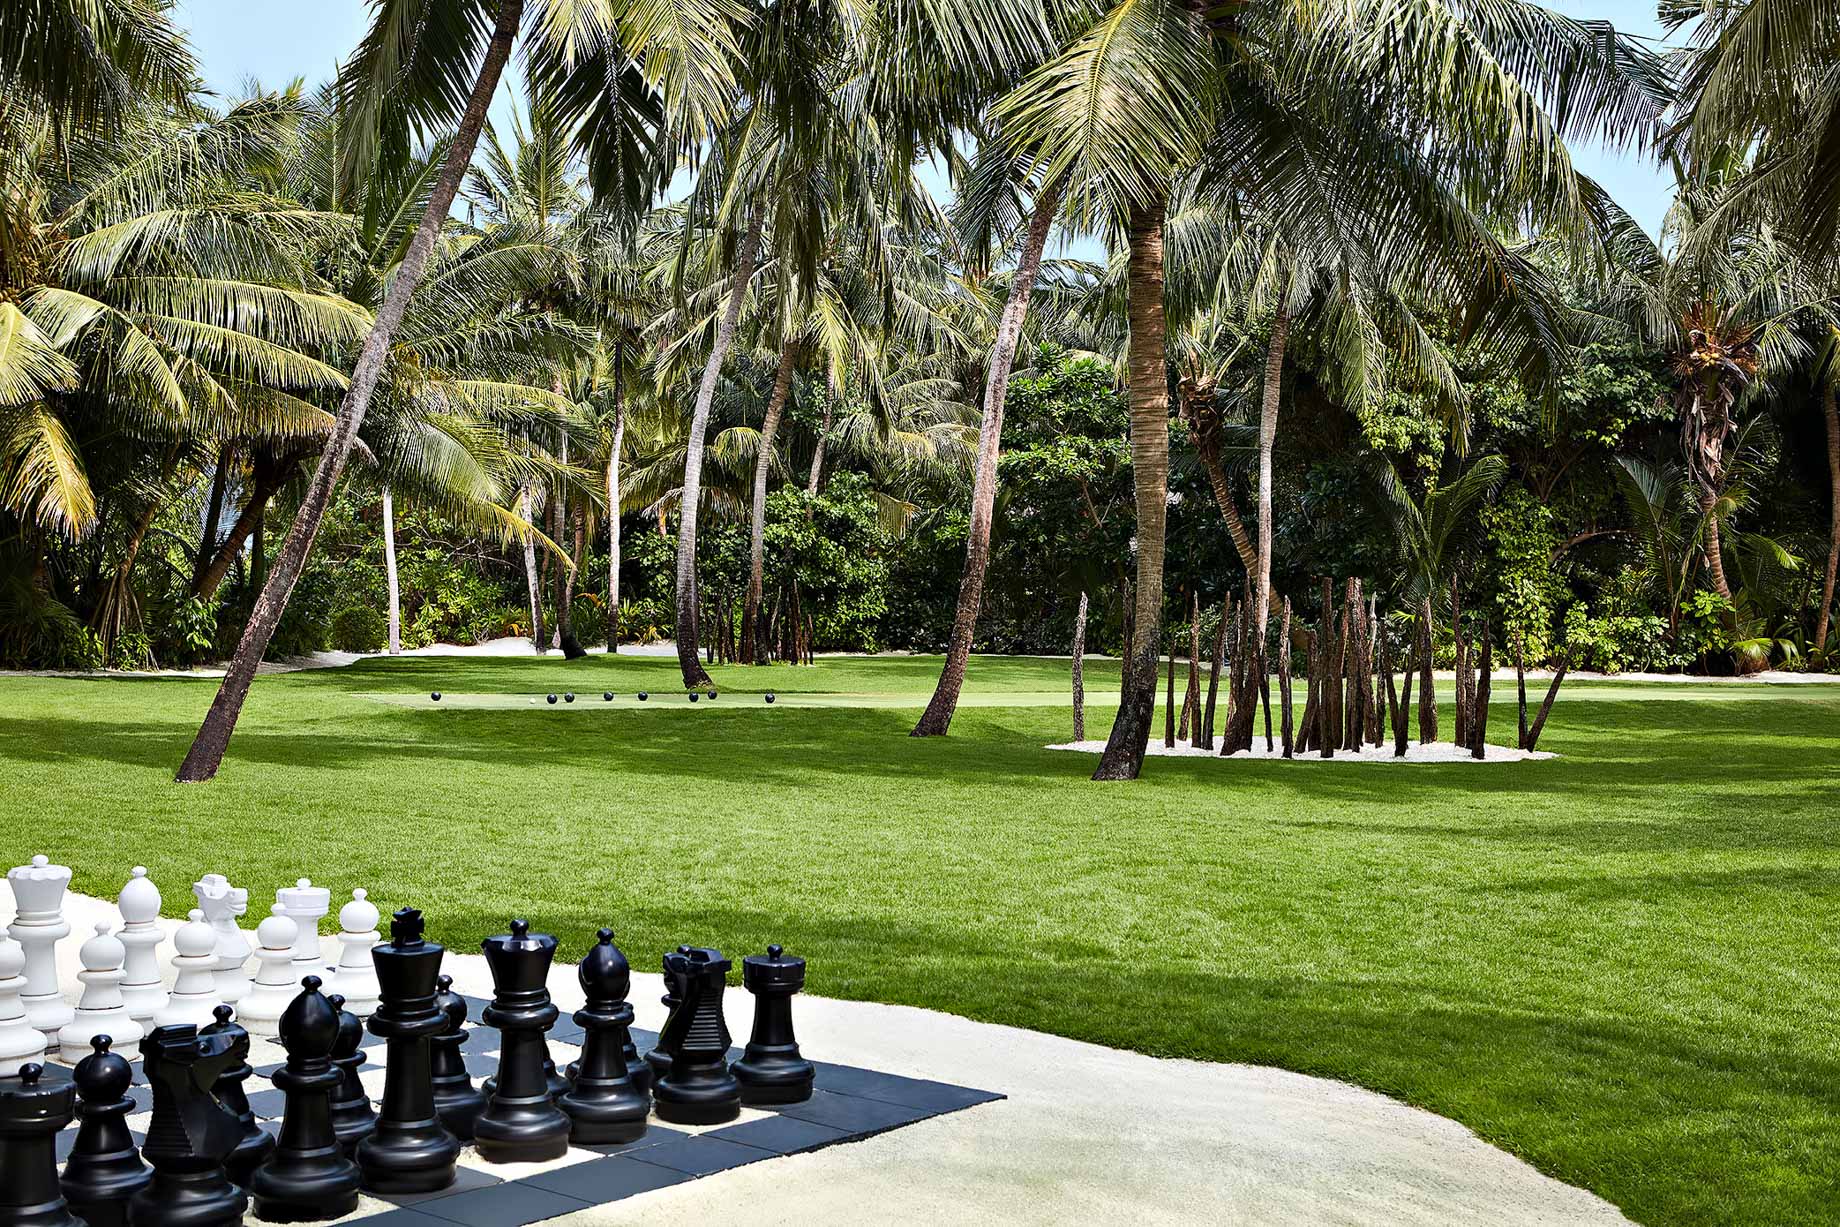 One&Only Reethi Rah Resort – North Male Atoll, Maldives – The Lawn Club Chess